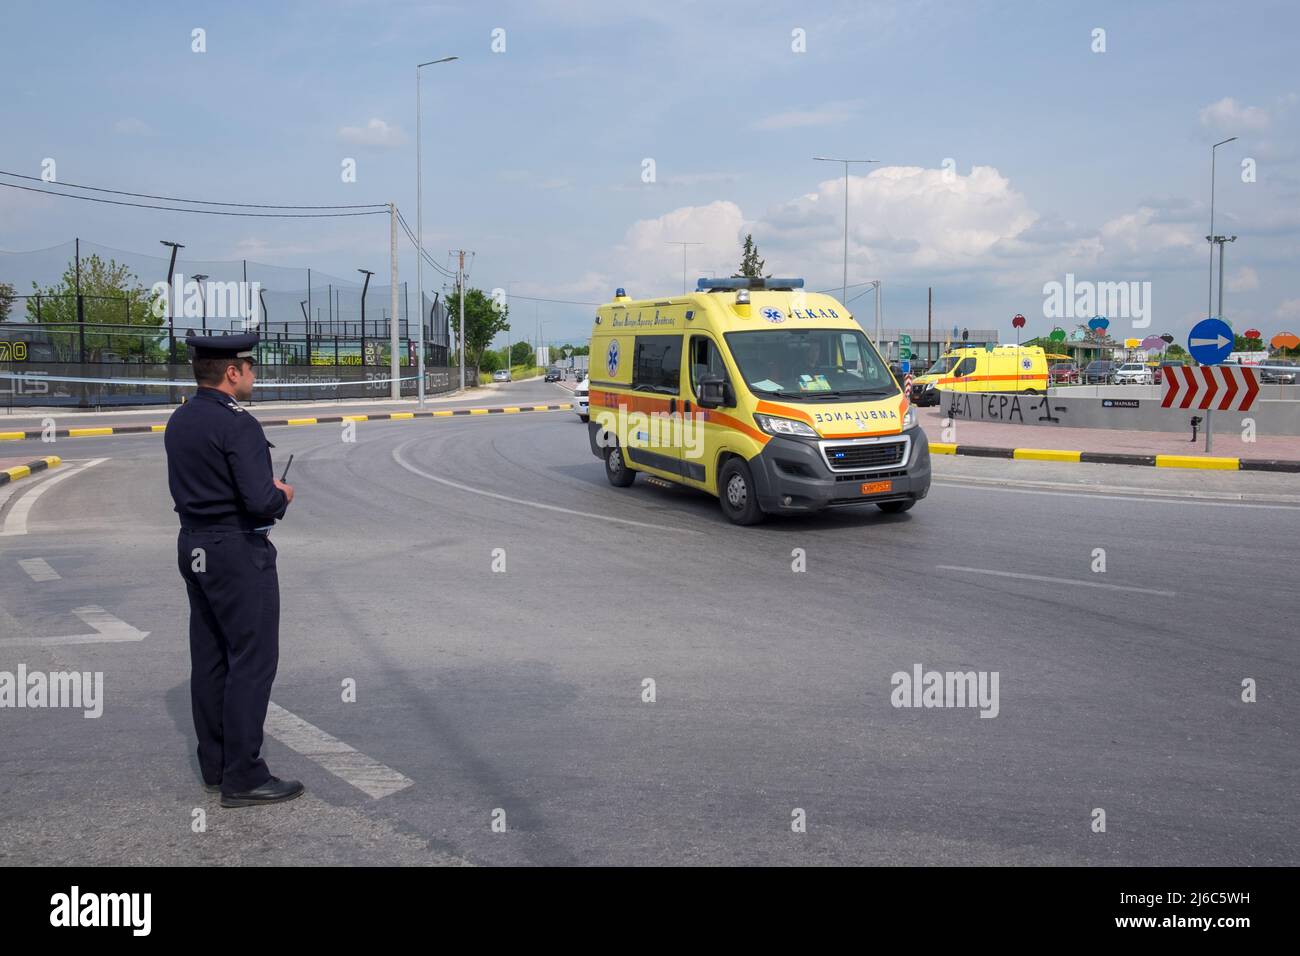 Police officer controlling the traffic with two ambulances following the cyclists in the 2022 International Tour of Hellas cycling race Stock Photo